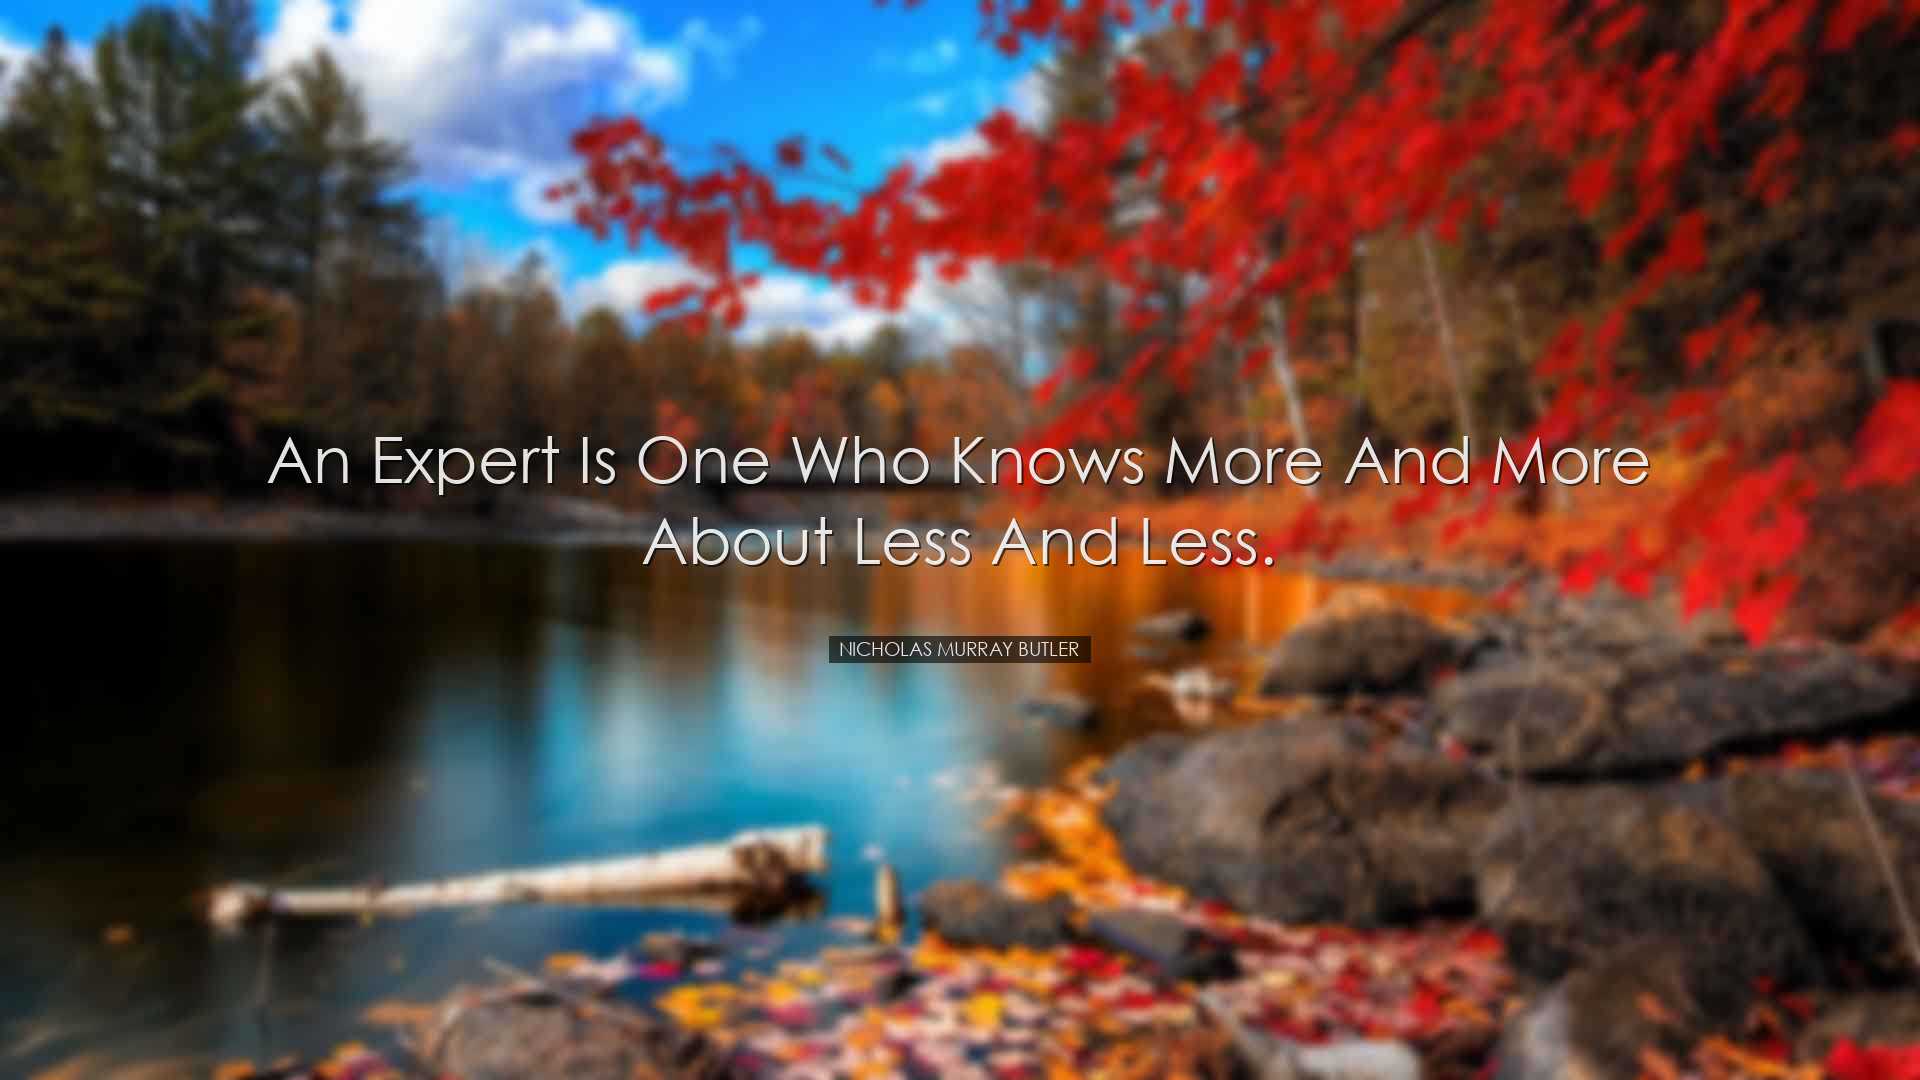 An expert is one who knows more and more about less and less. - Ni